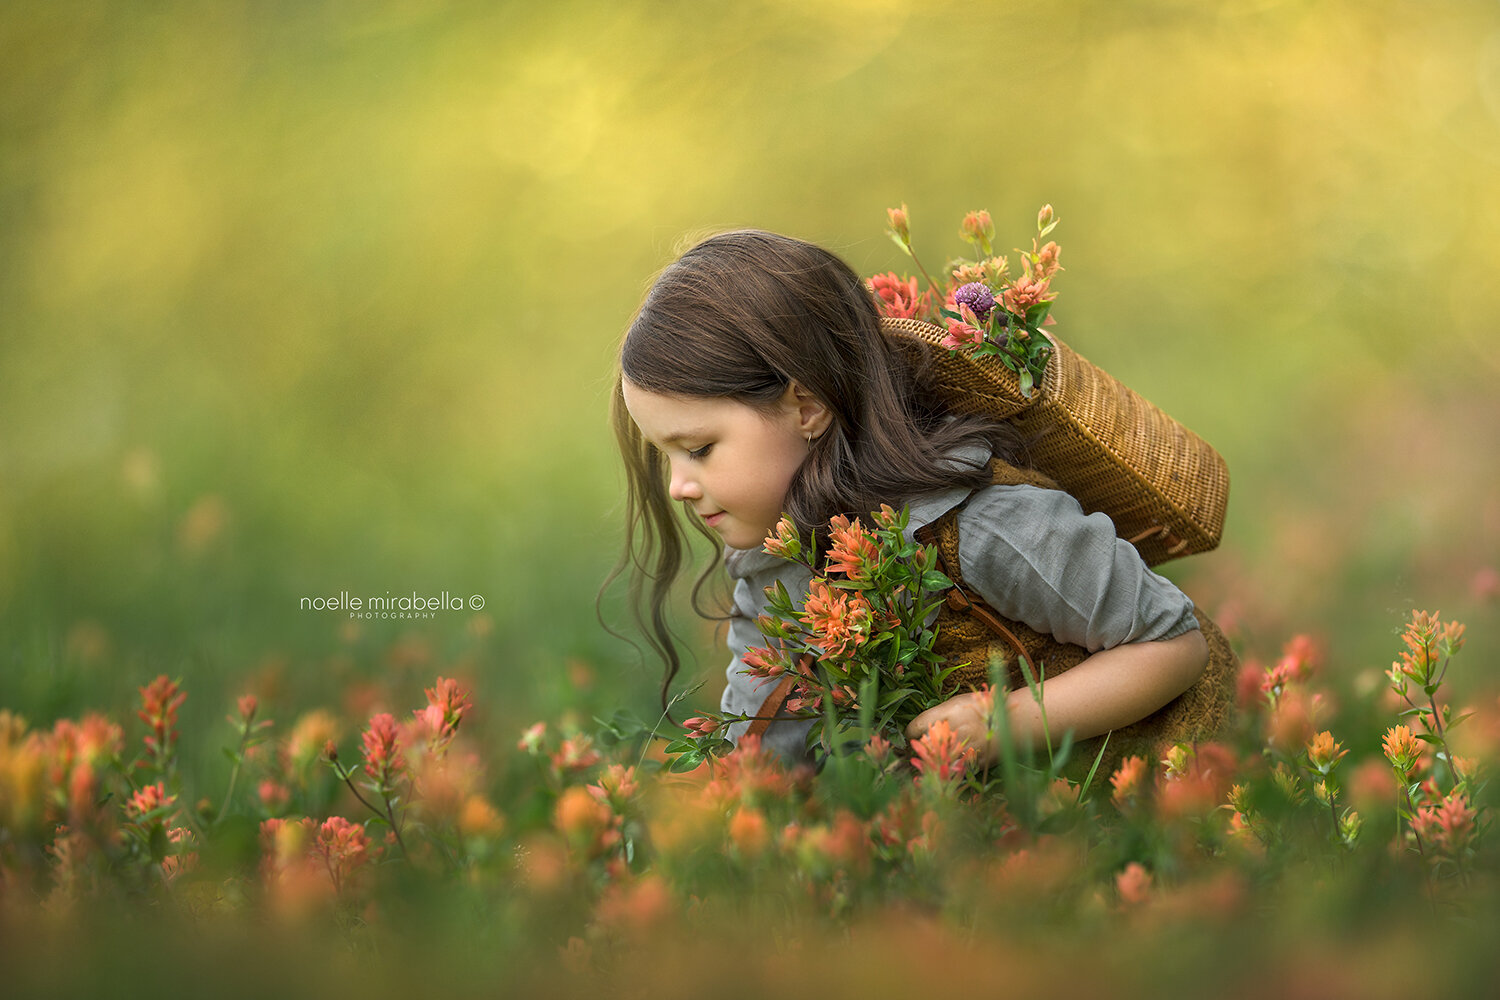 Girl in a meadow picking flowers.